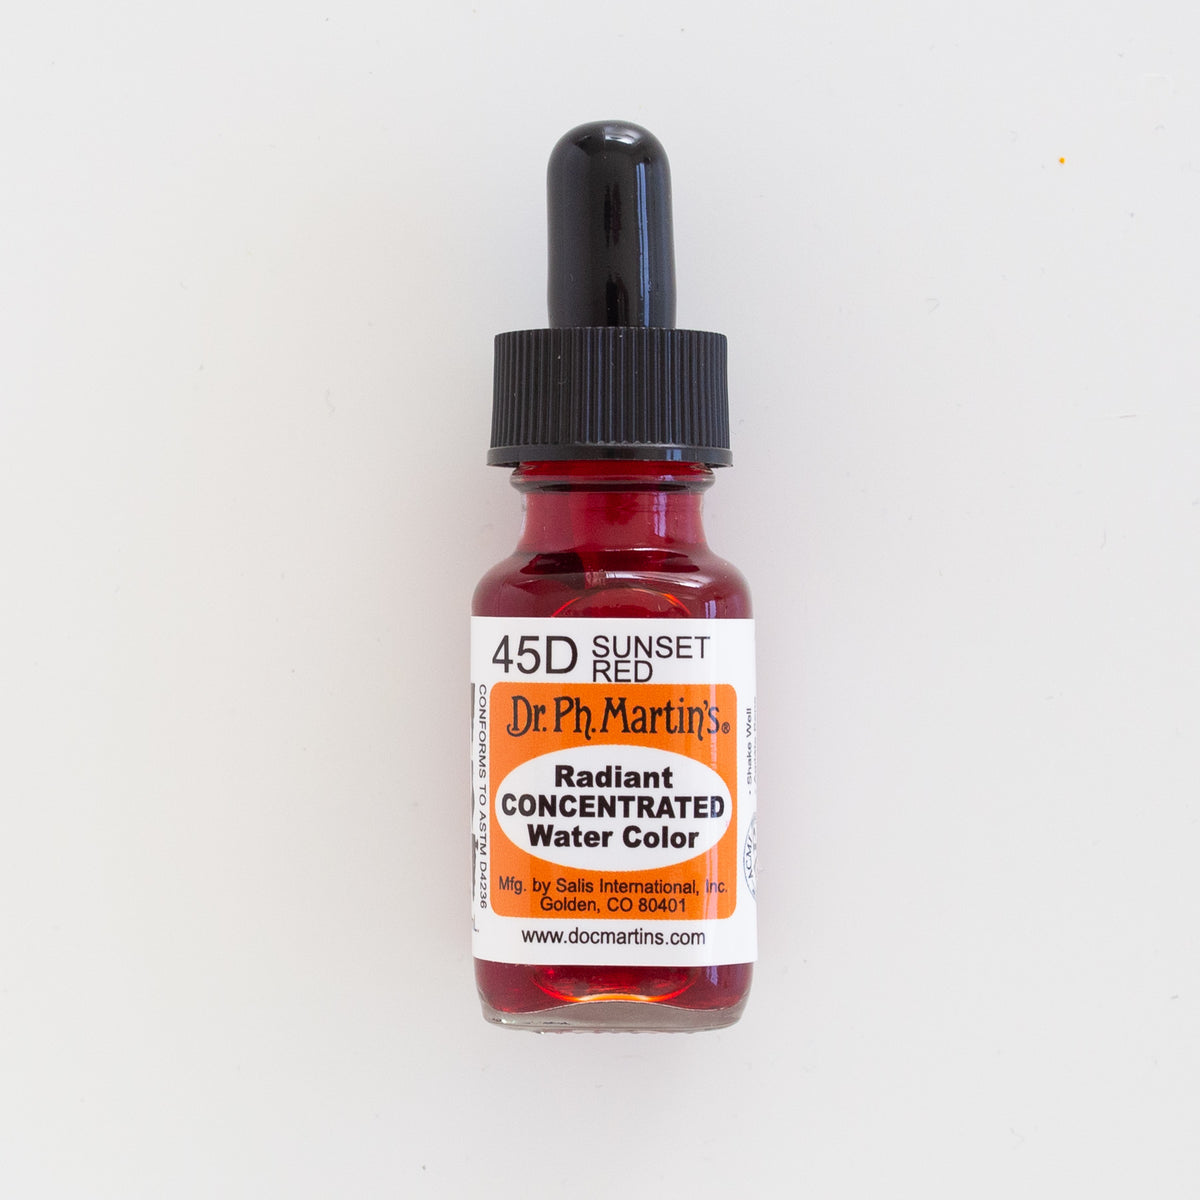 DR. Ph. Martin's Radiant Concentrated 45D Sunset Red